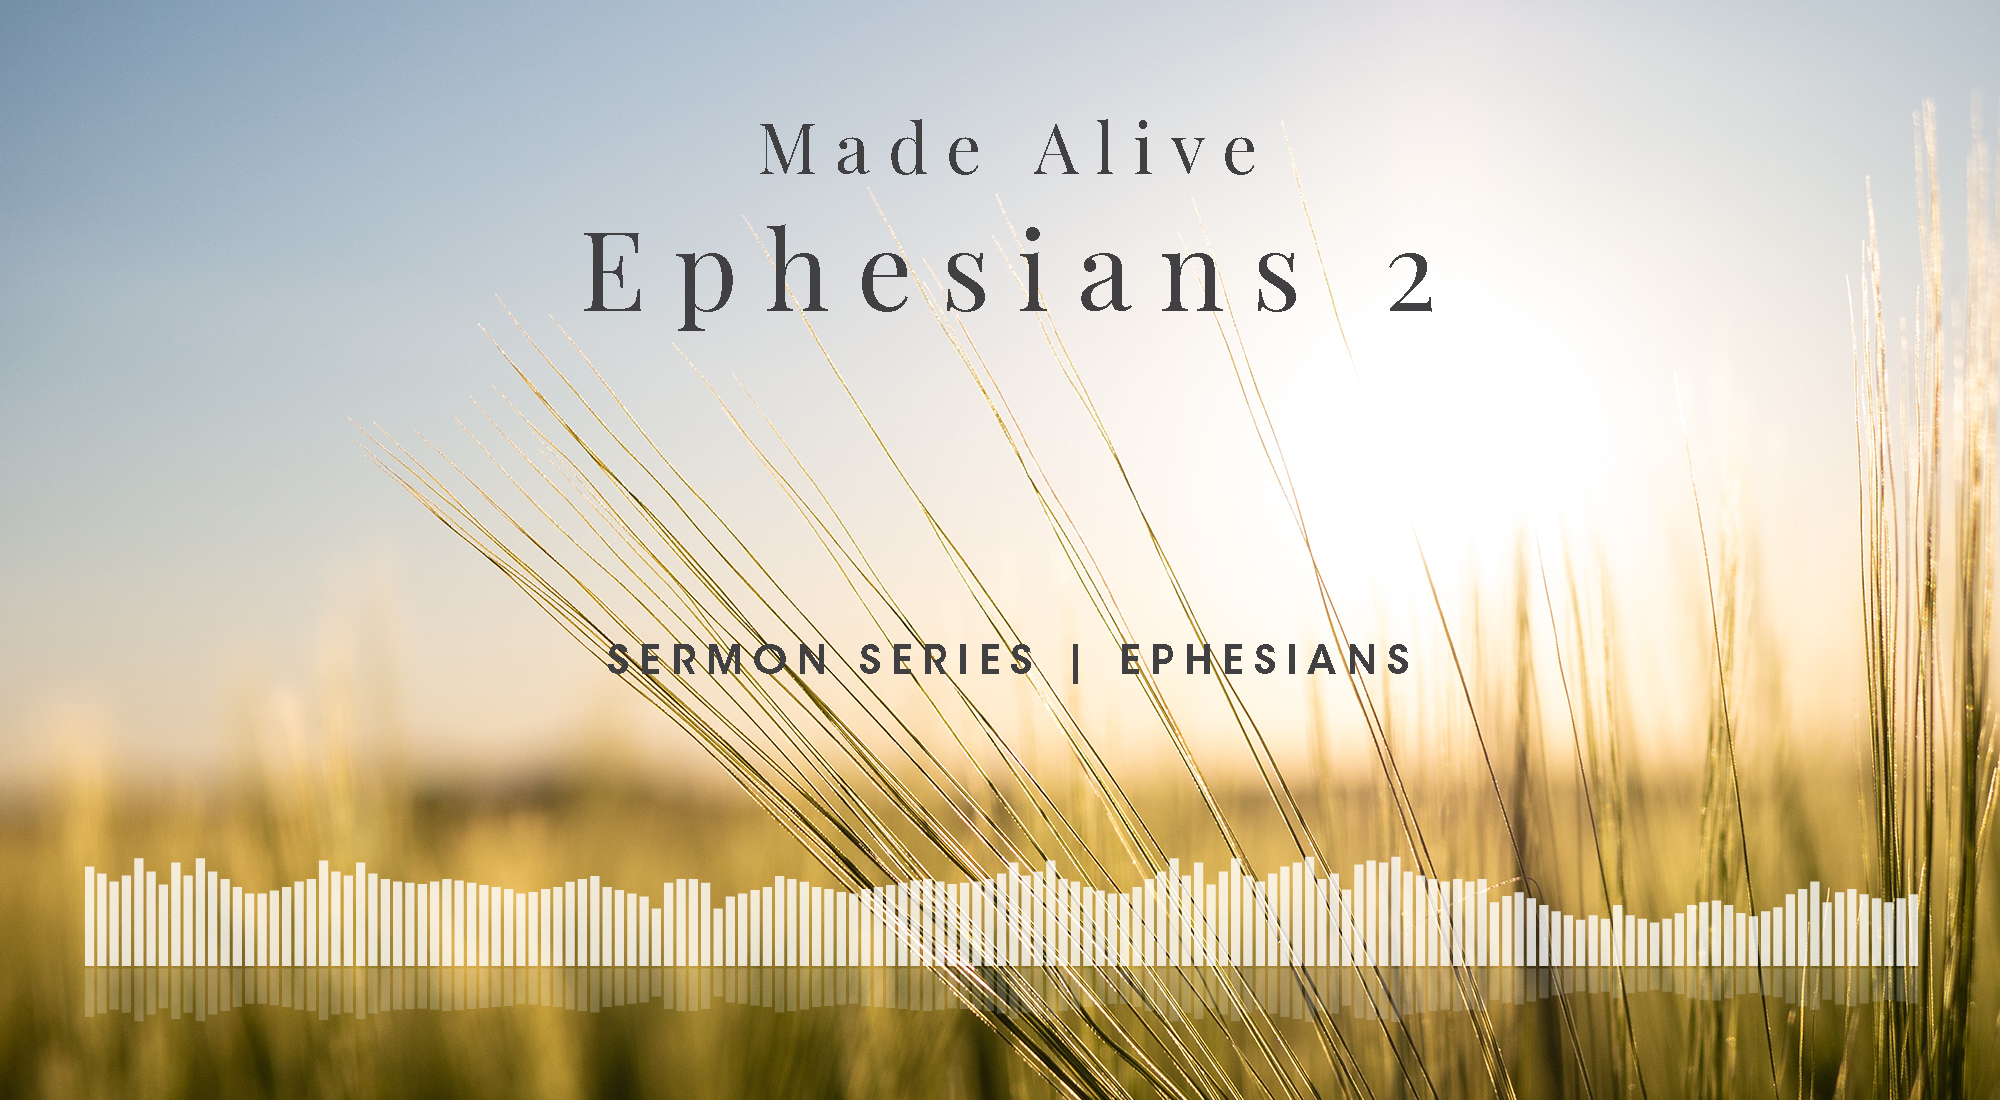 Made Alive Ephesians 2, From Our Ephesians Sermon Series, Wyandotte County Christian Church